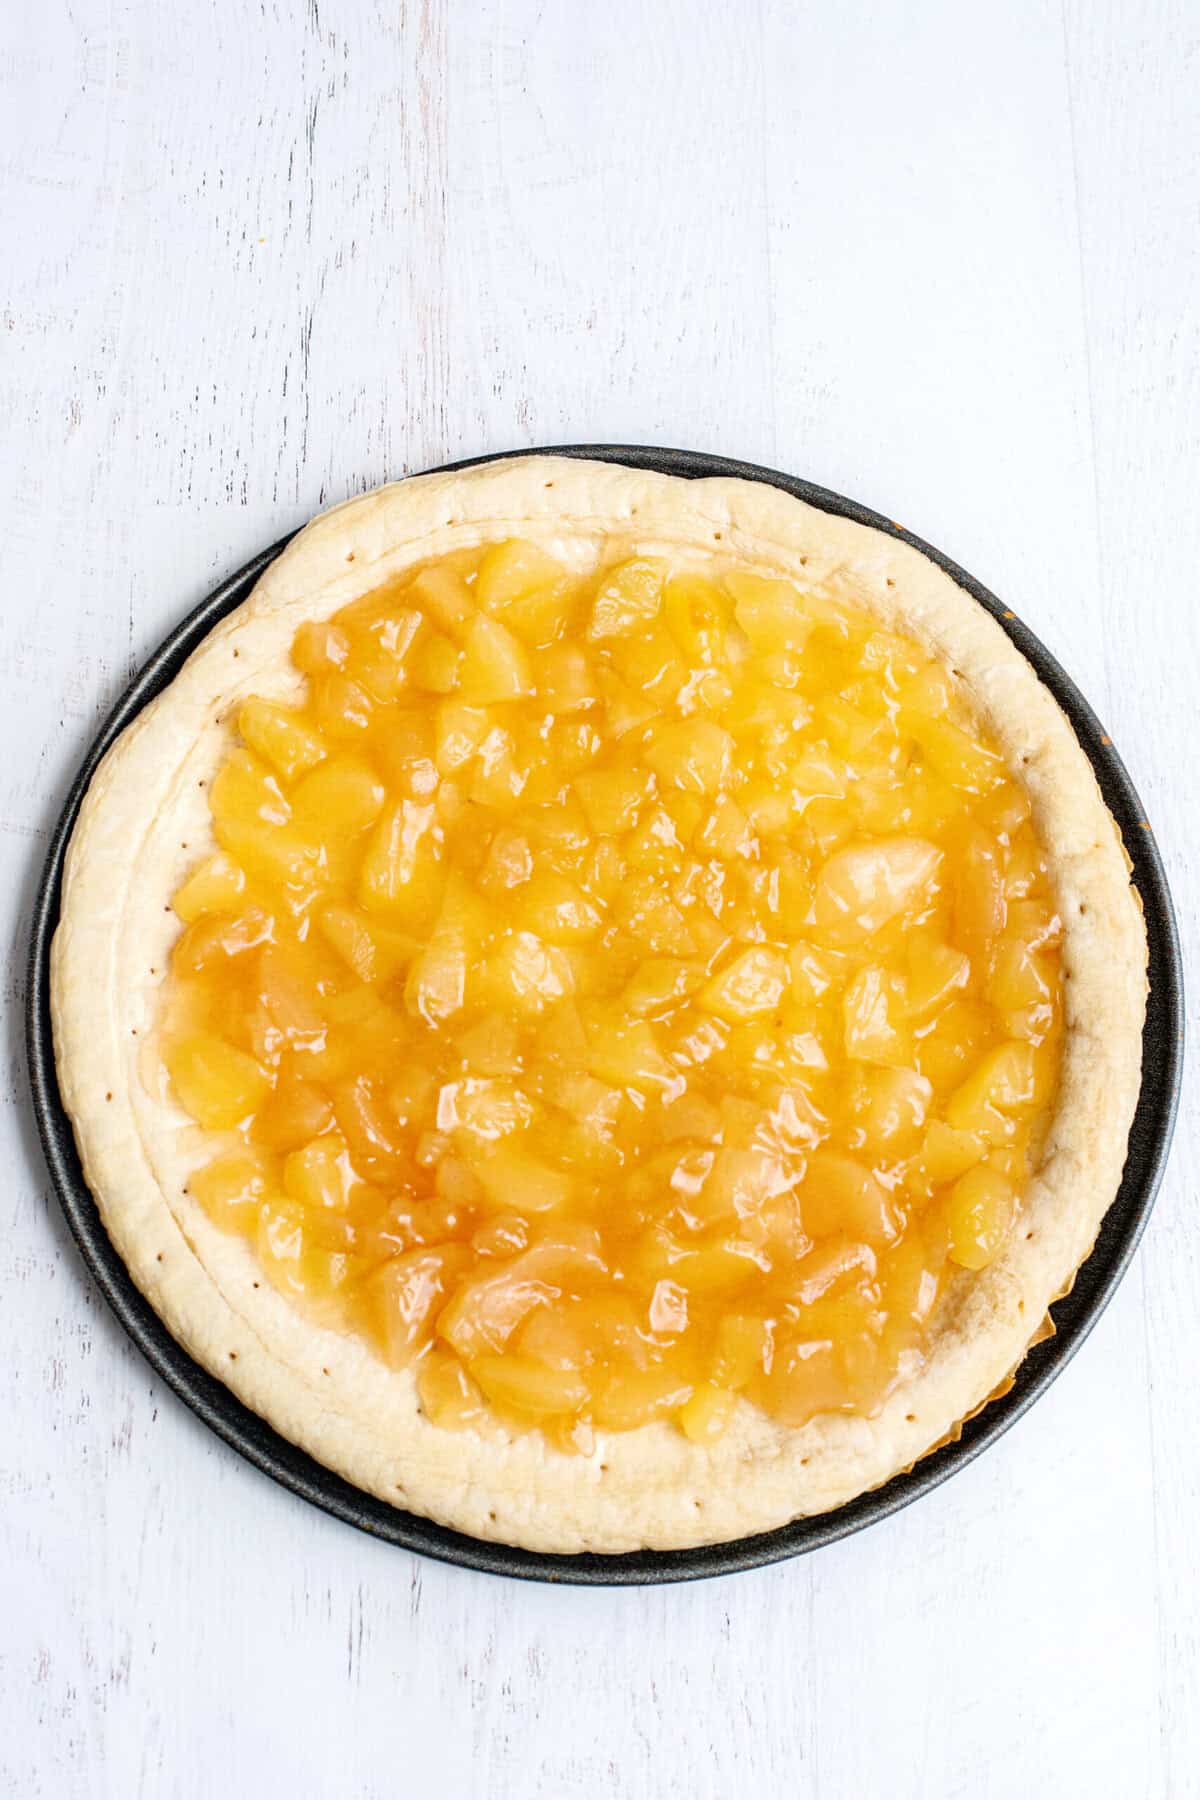 cover pizza crust with apple pie filling